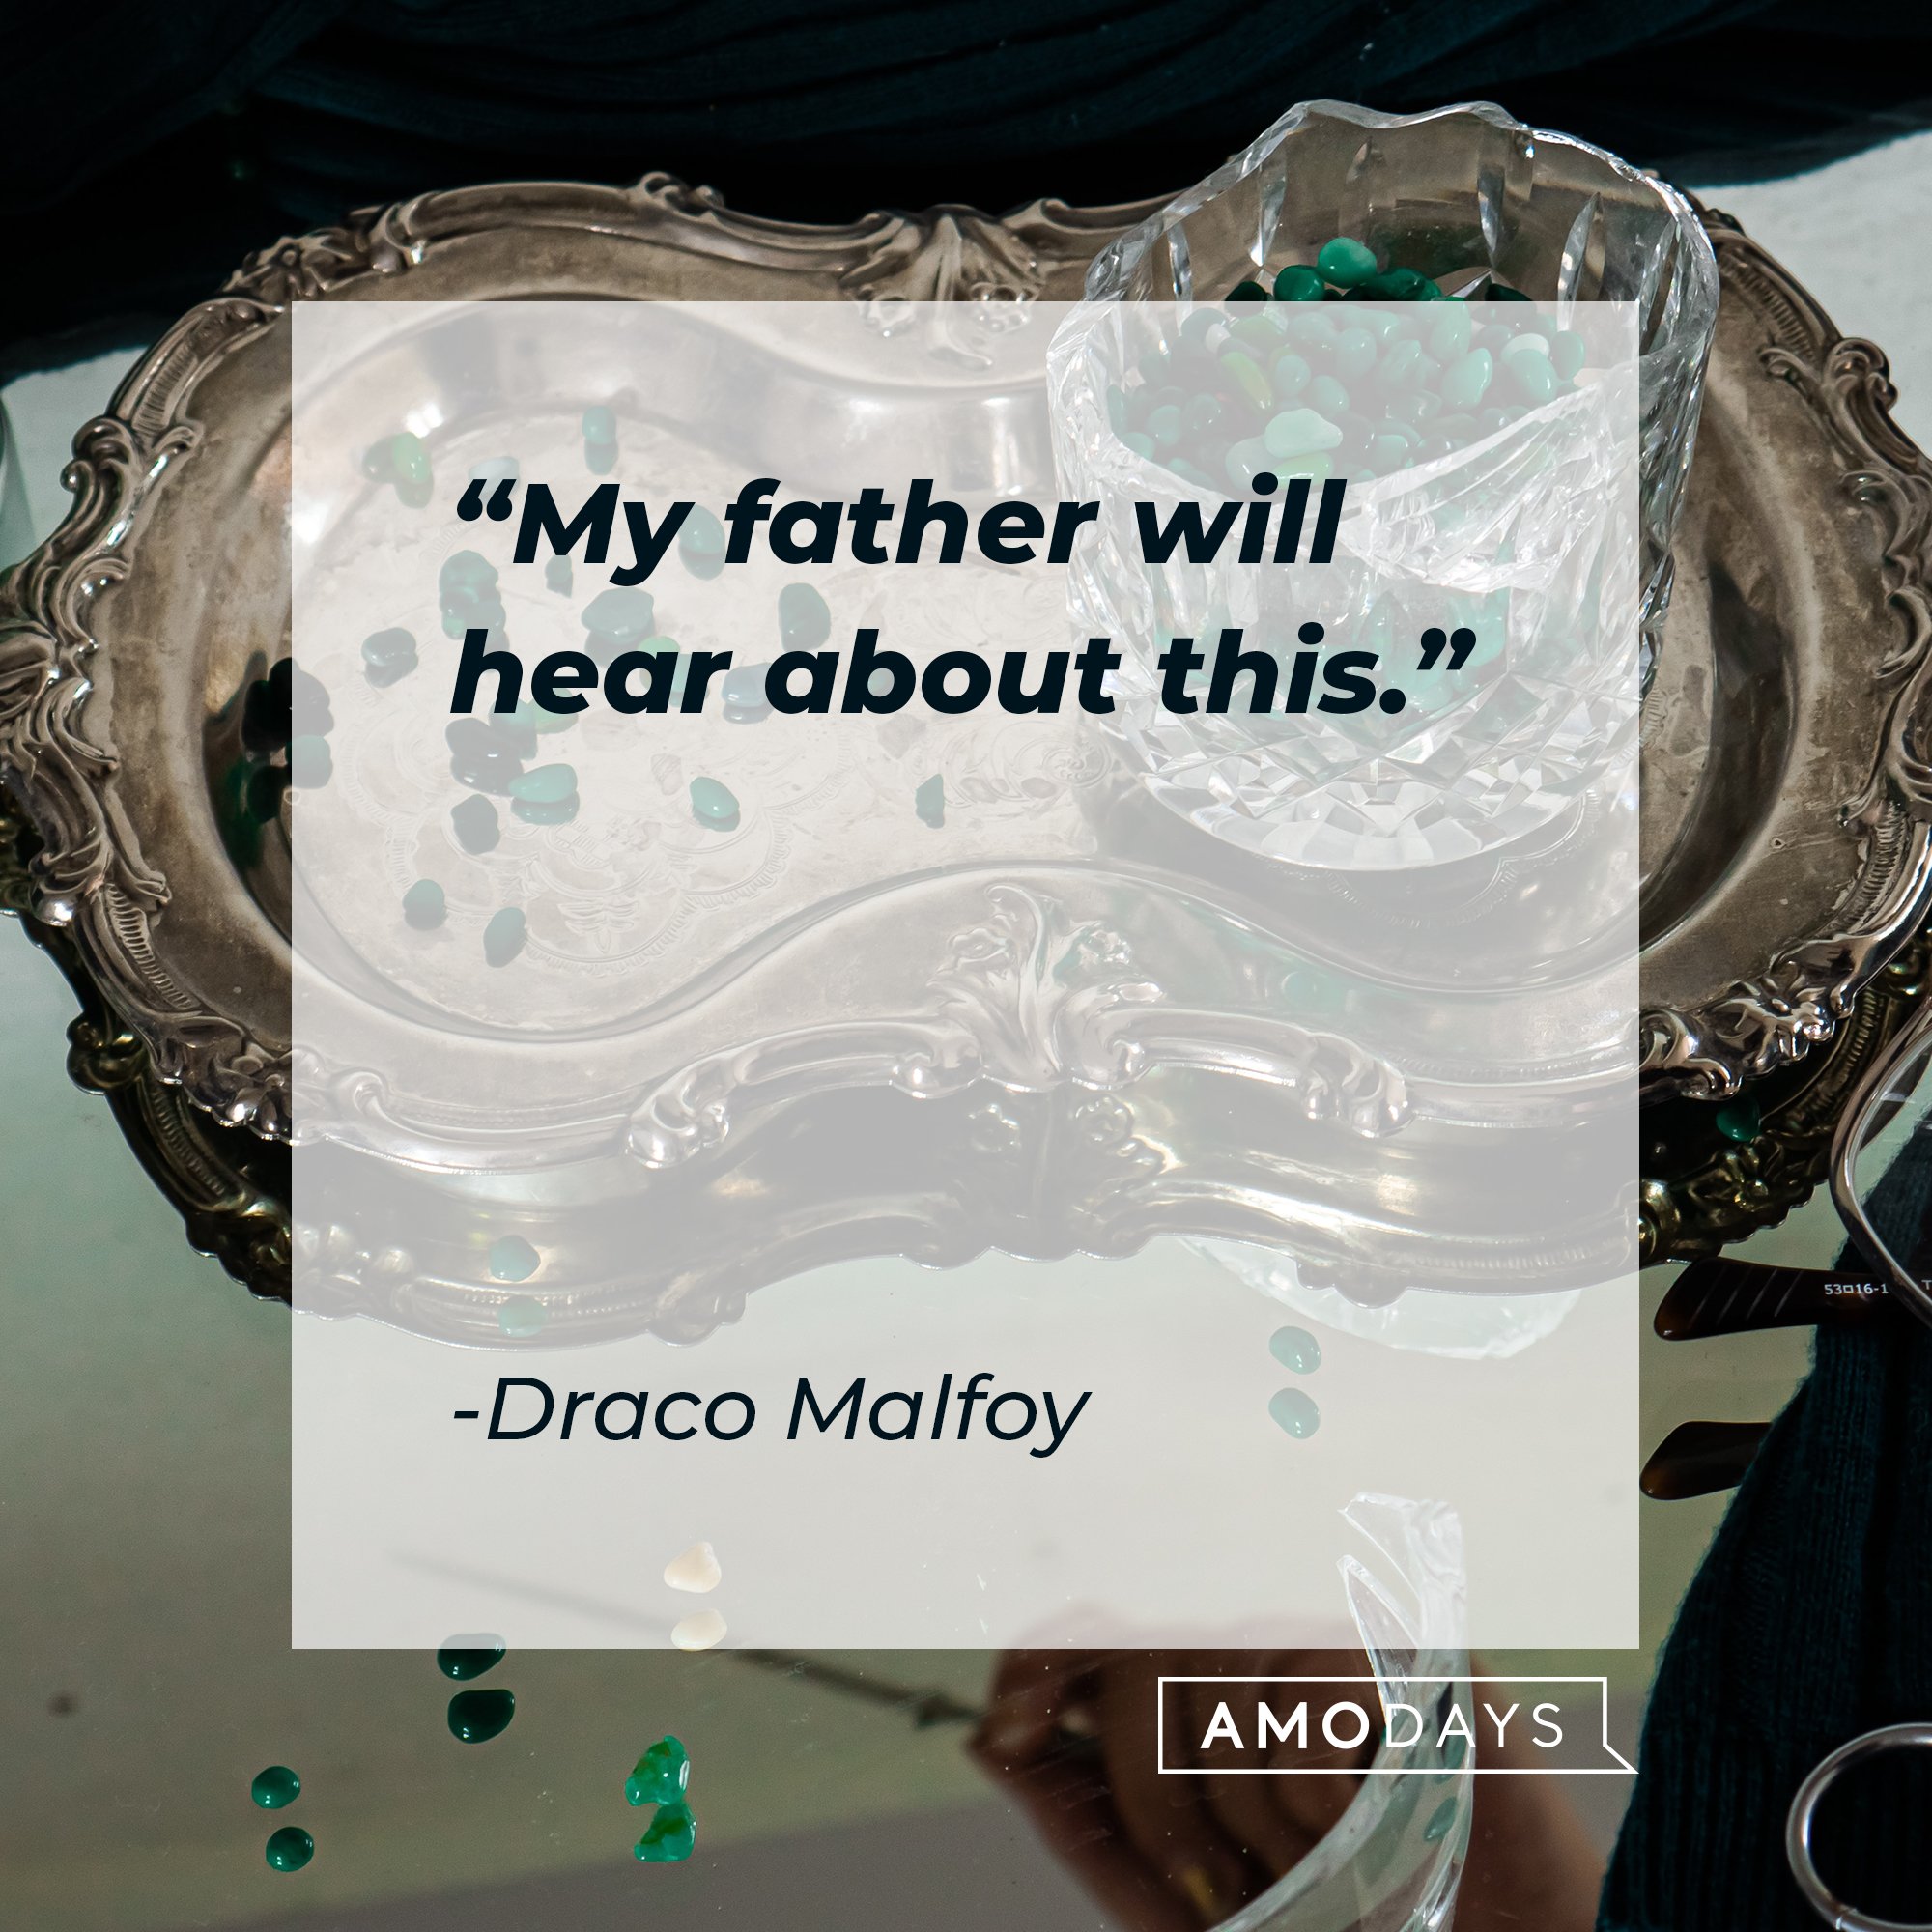 Draco Malfoy’s quote: “My father will hear about this.” | Image: AmoDays